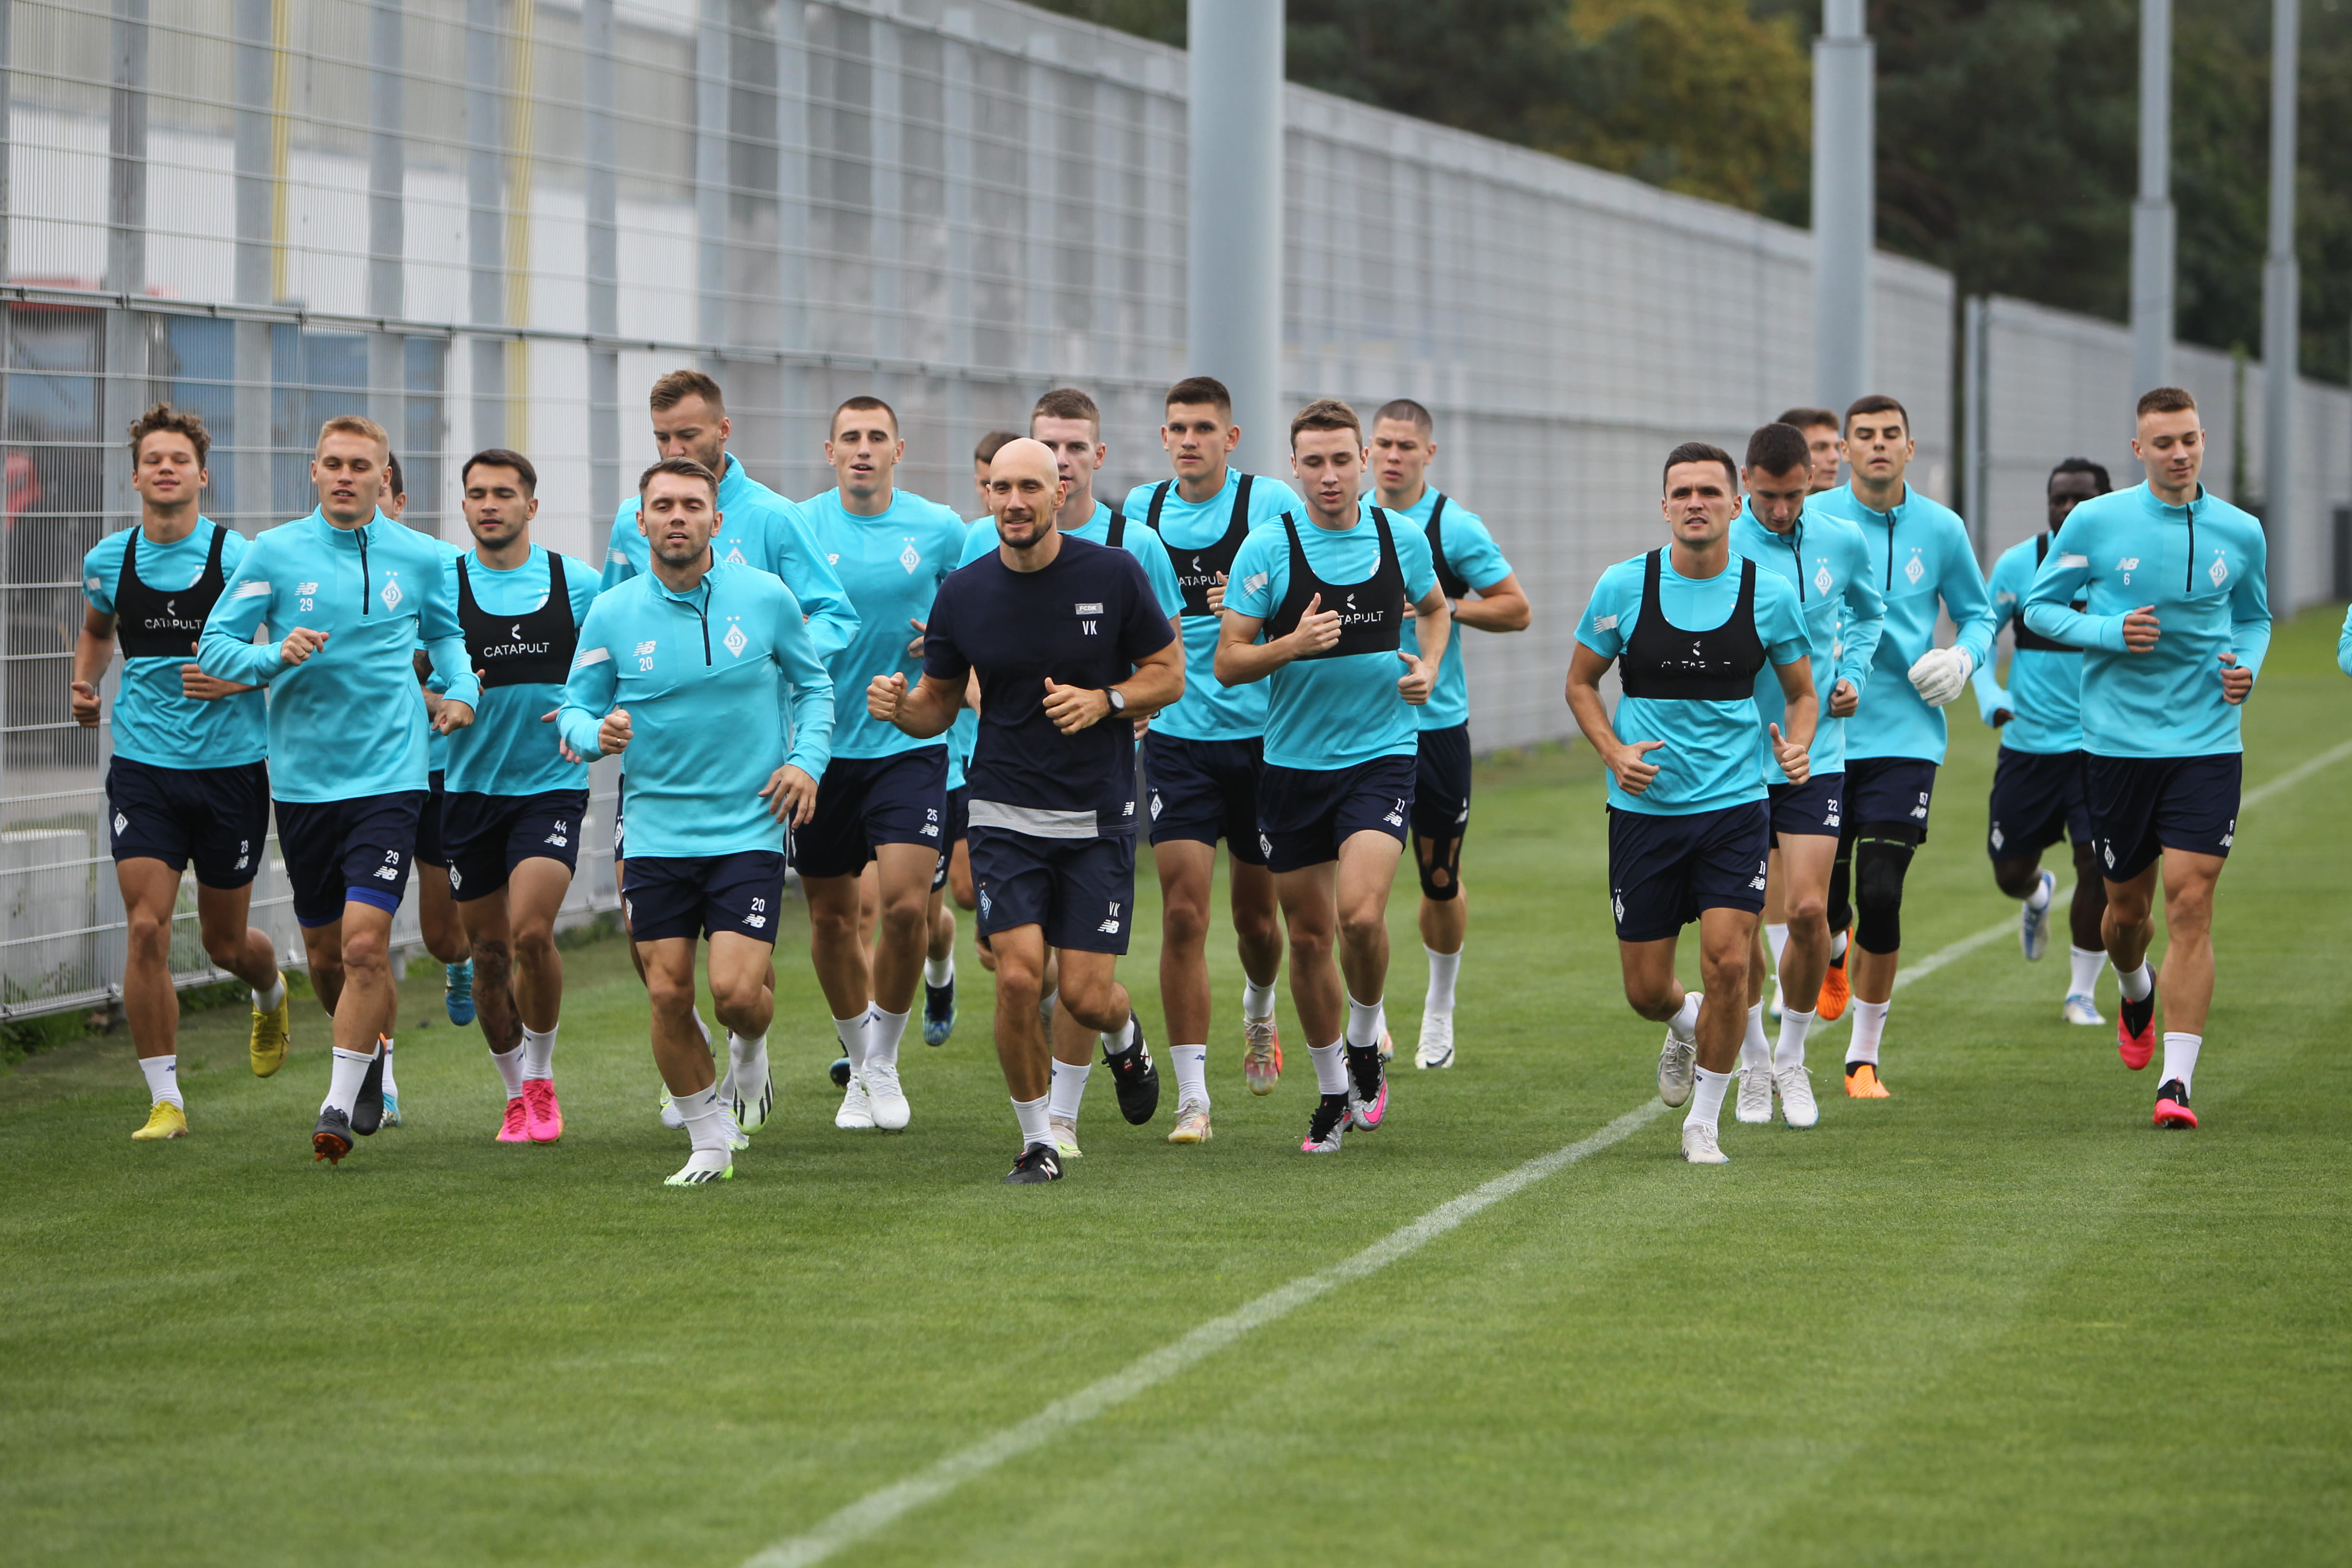 Back to the club: Dynamo getting ready for Vorskla